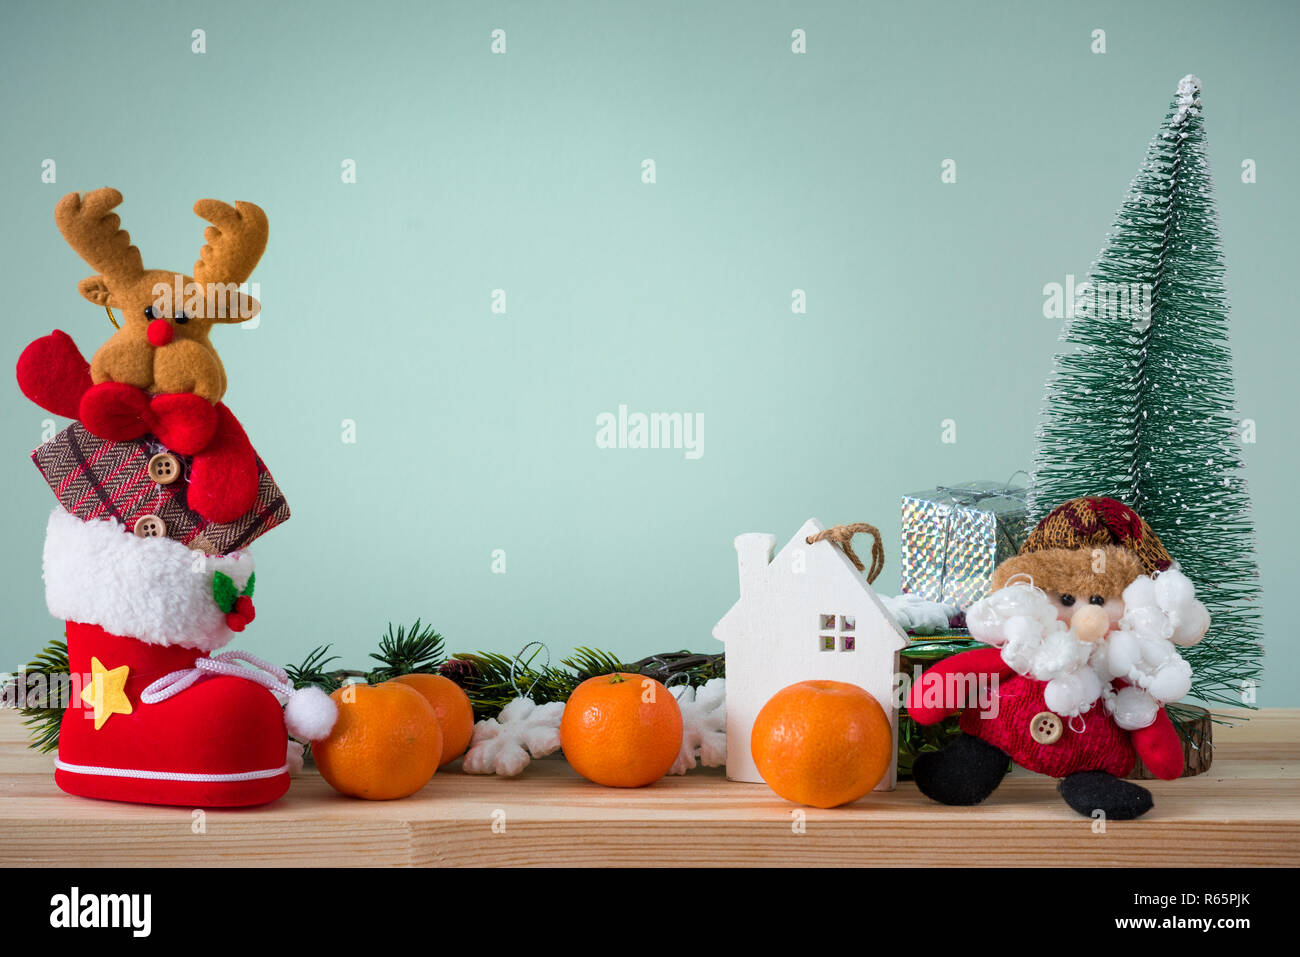 Christmas background 2019 of decorations on the table Stock Photo